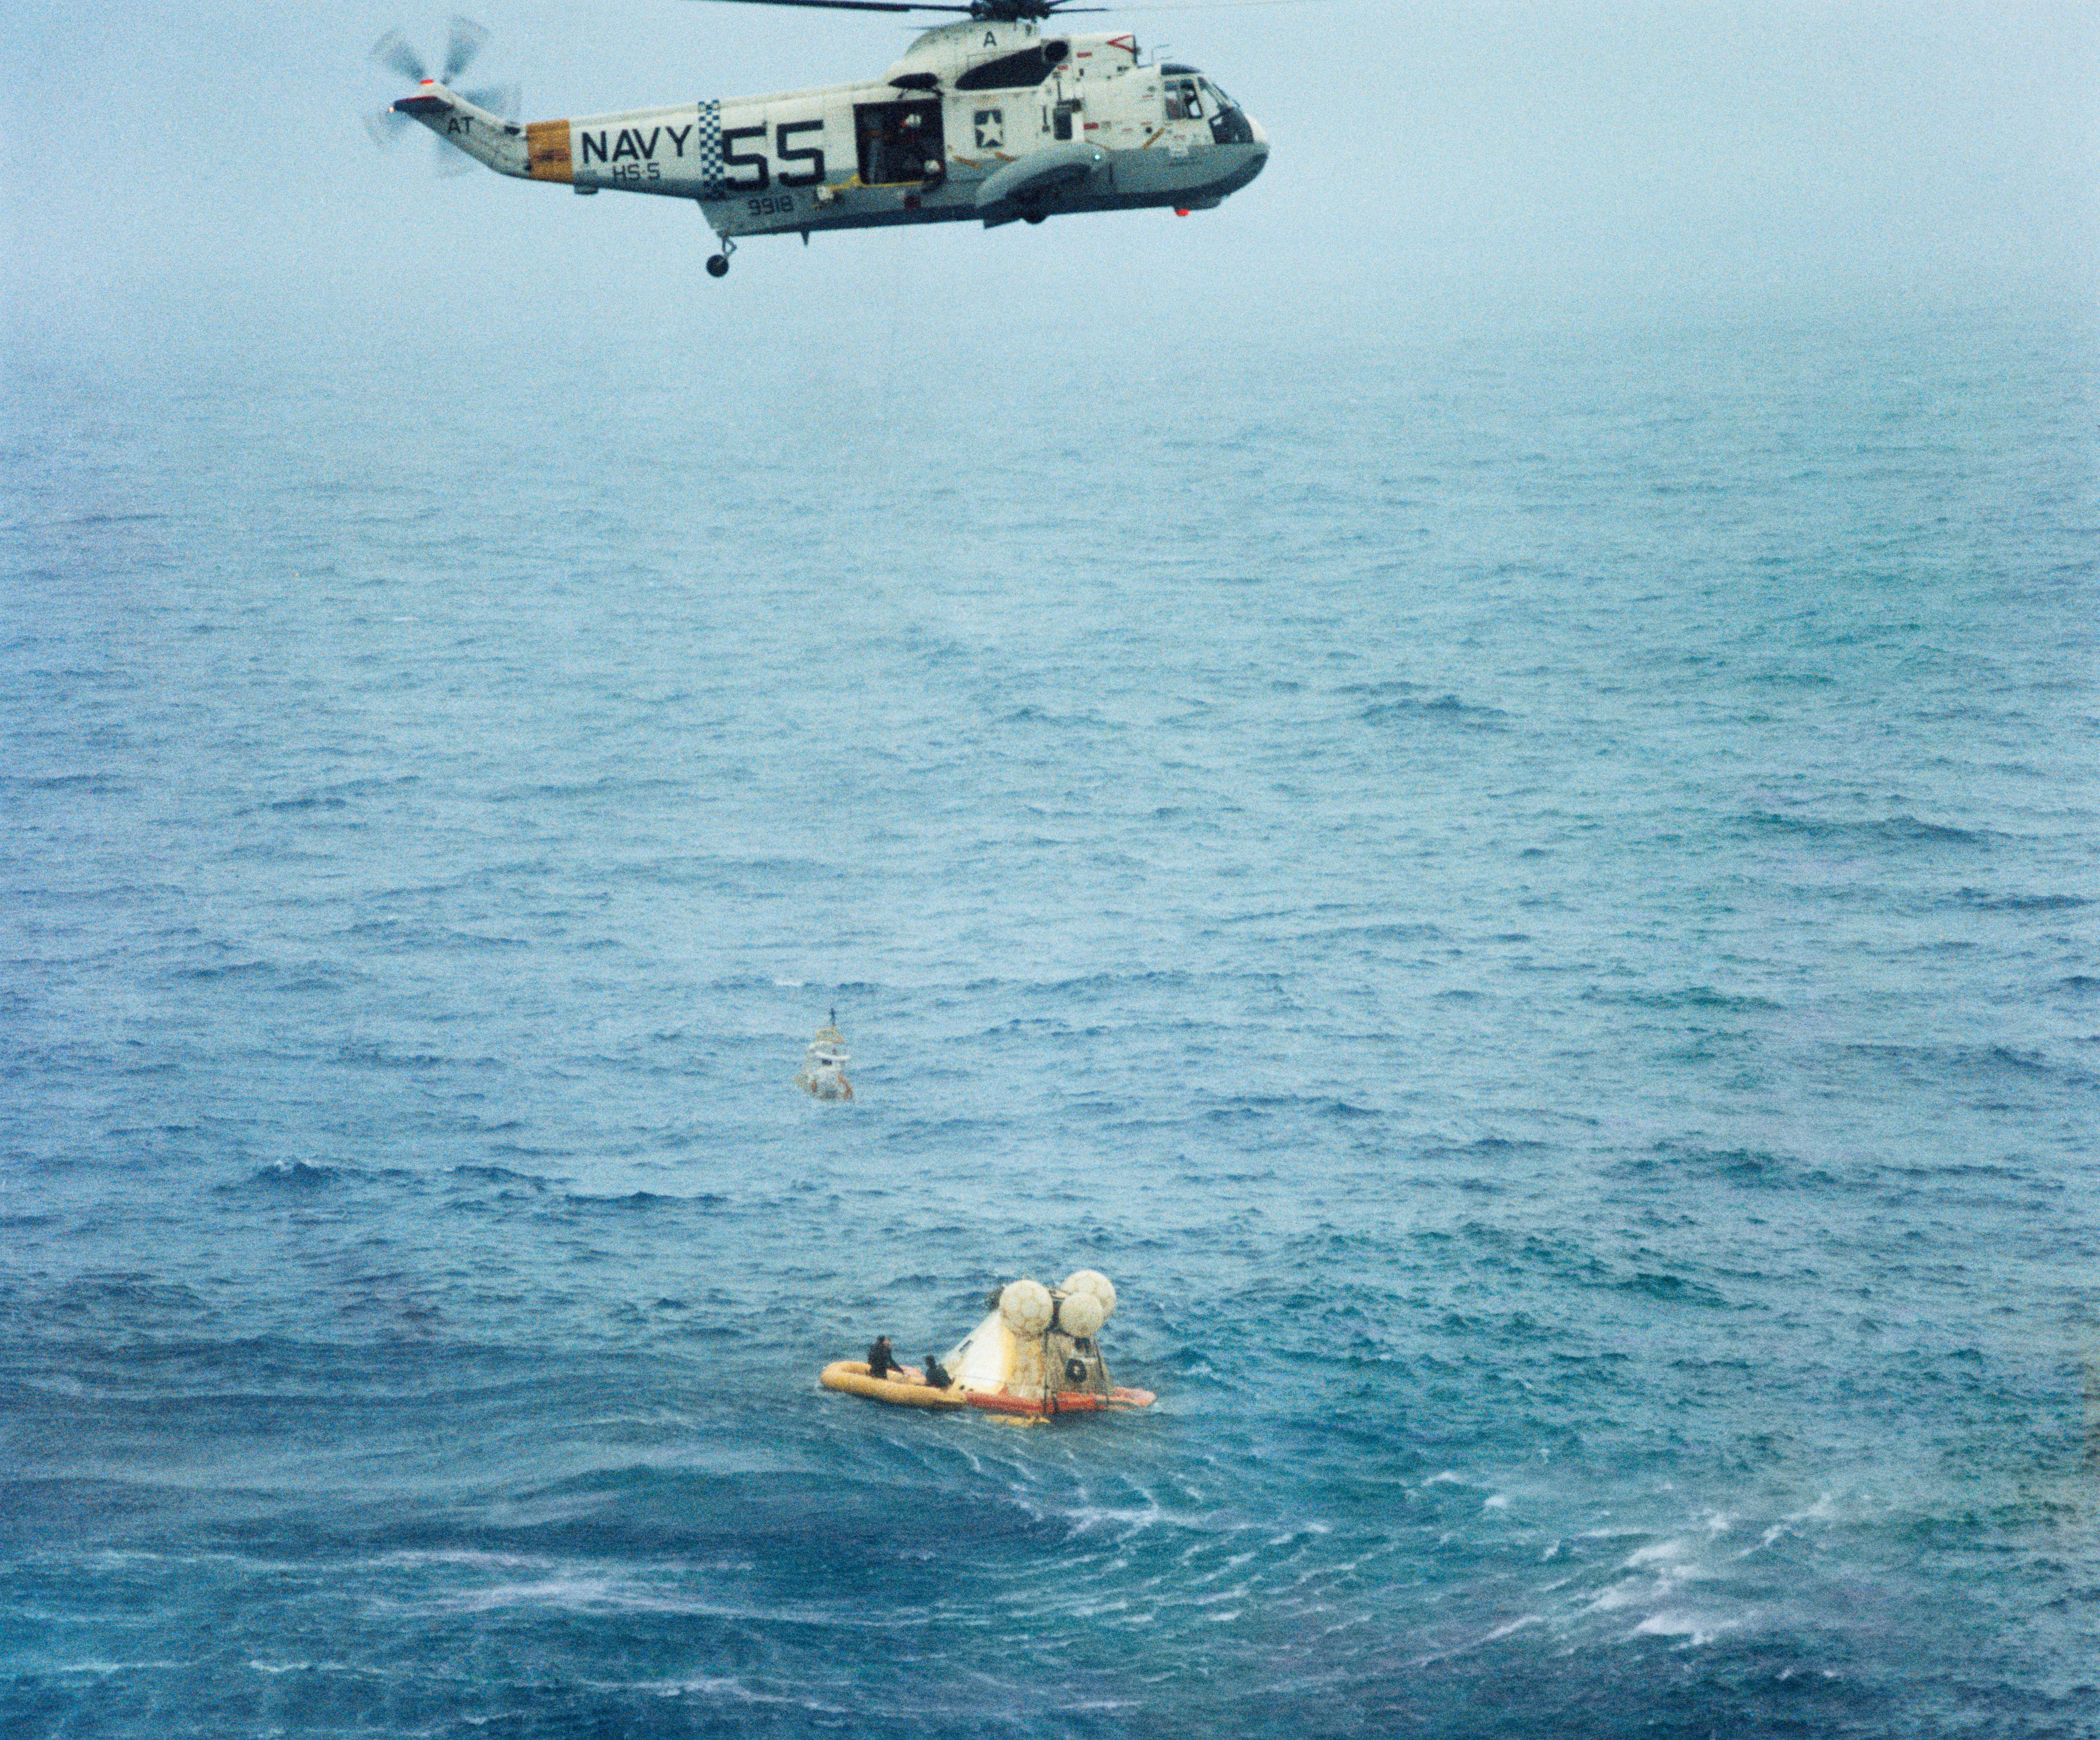 Apollo_7_recovery_with_SH-3_Sea_King_1968